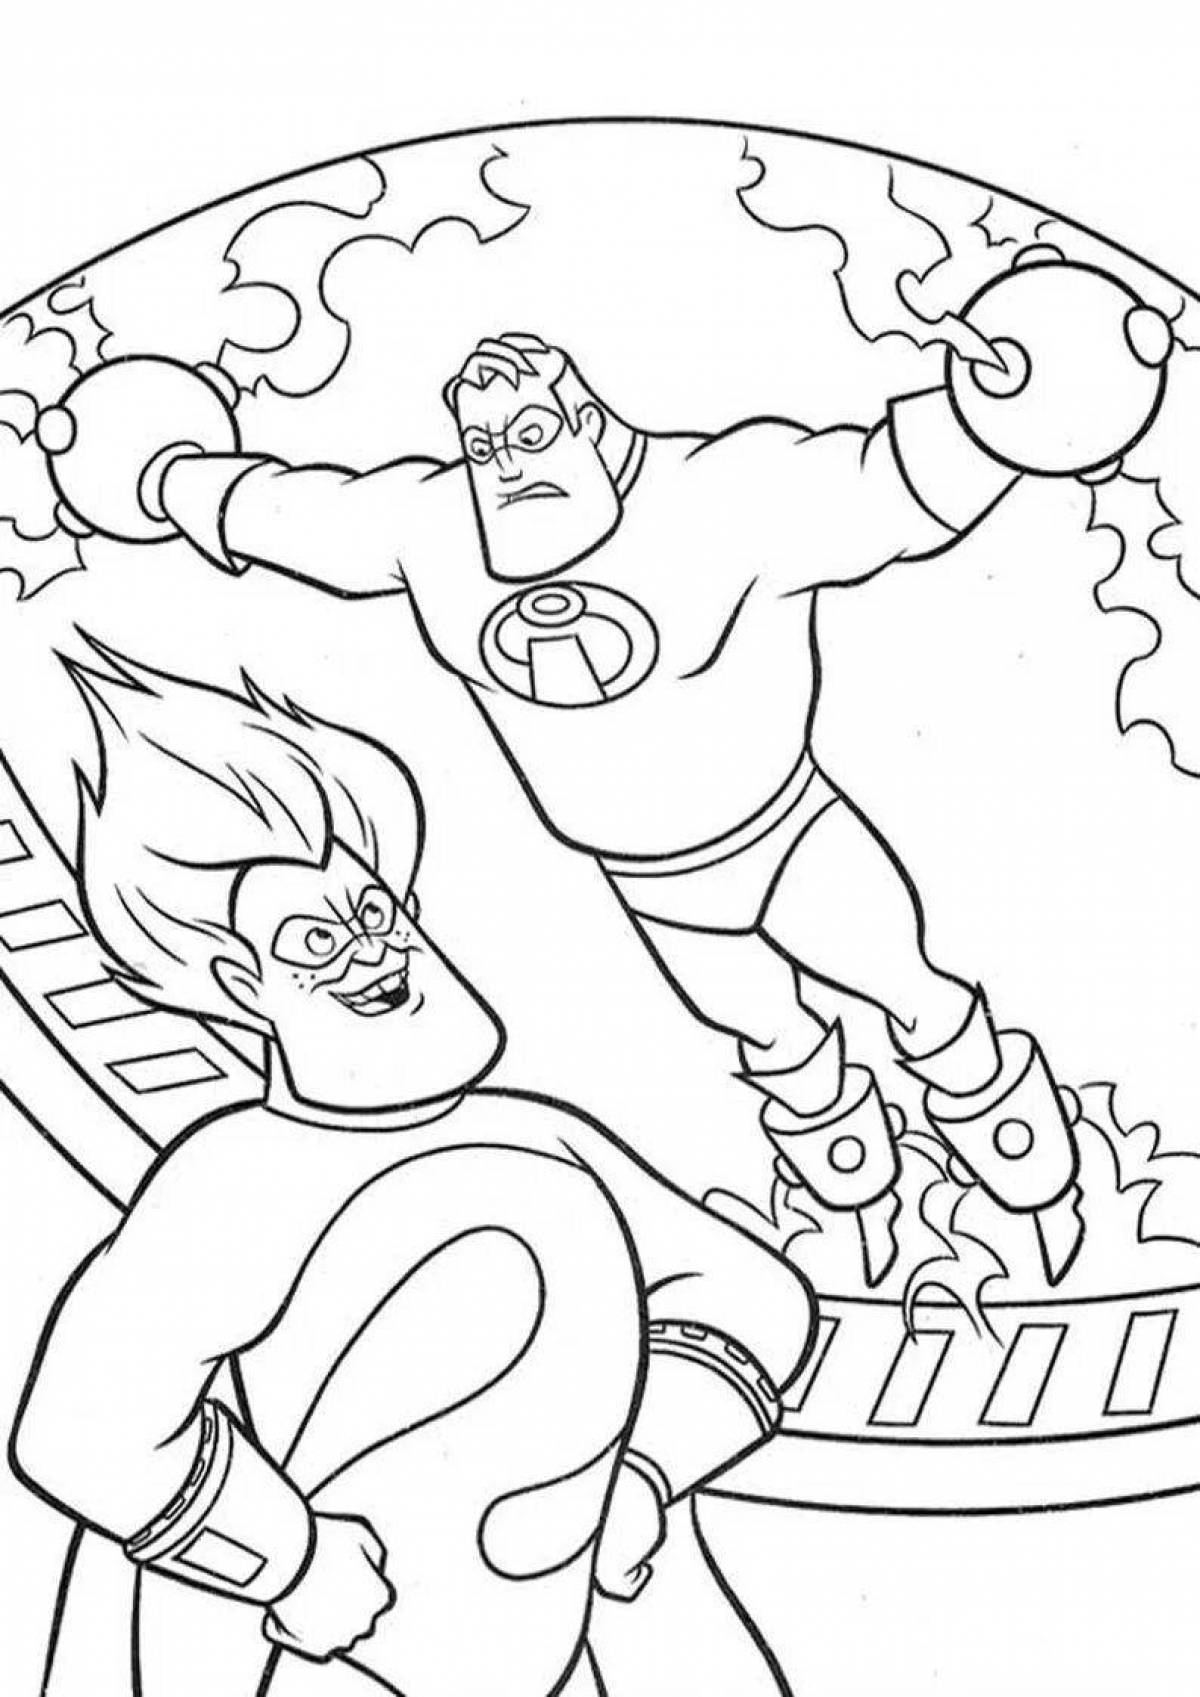 Adorable Incredibles coloring book for kids